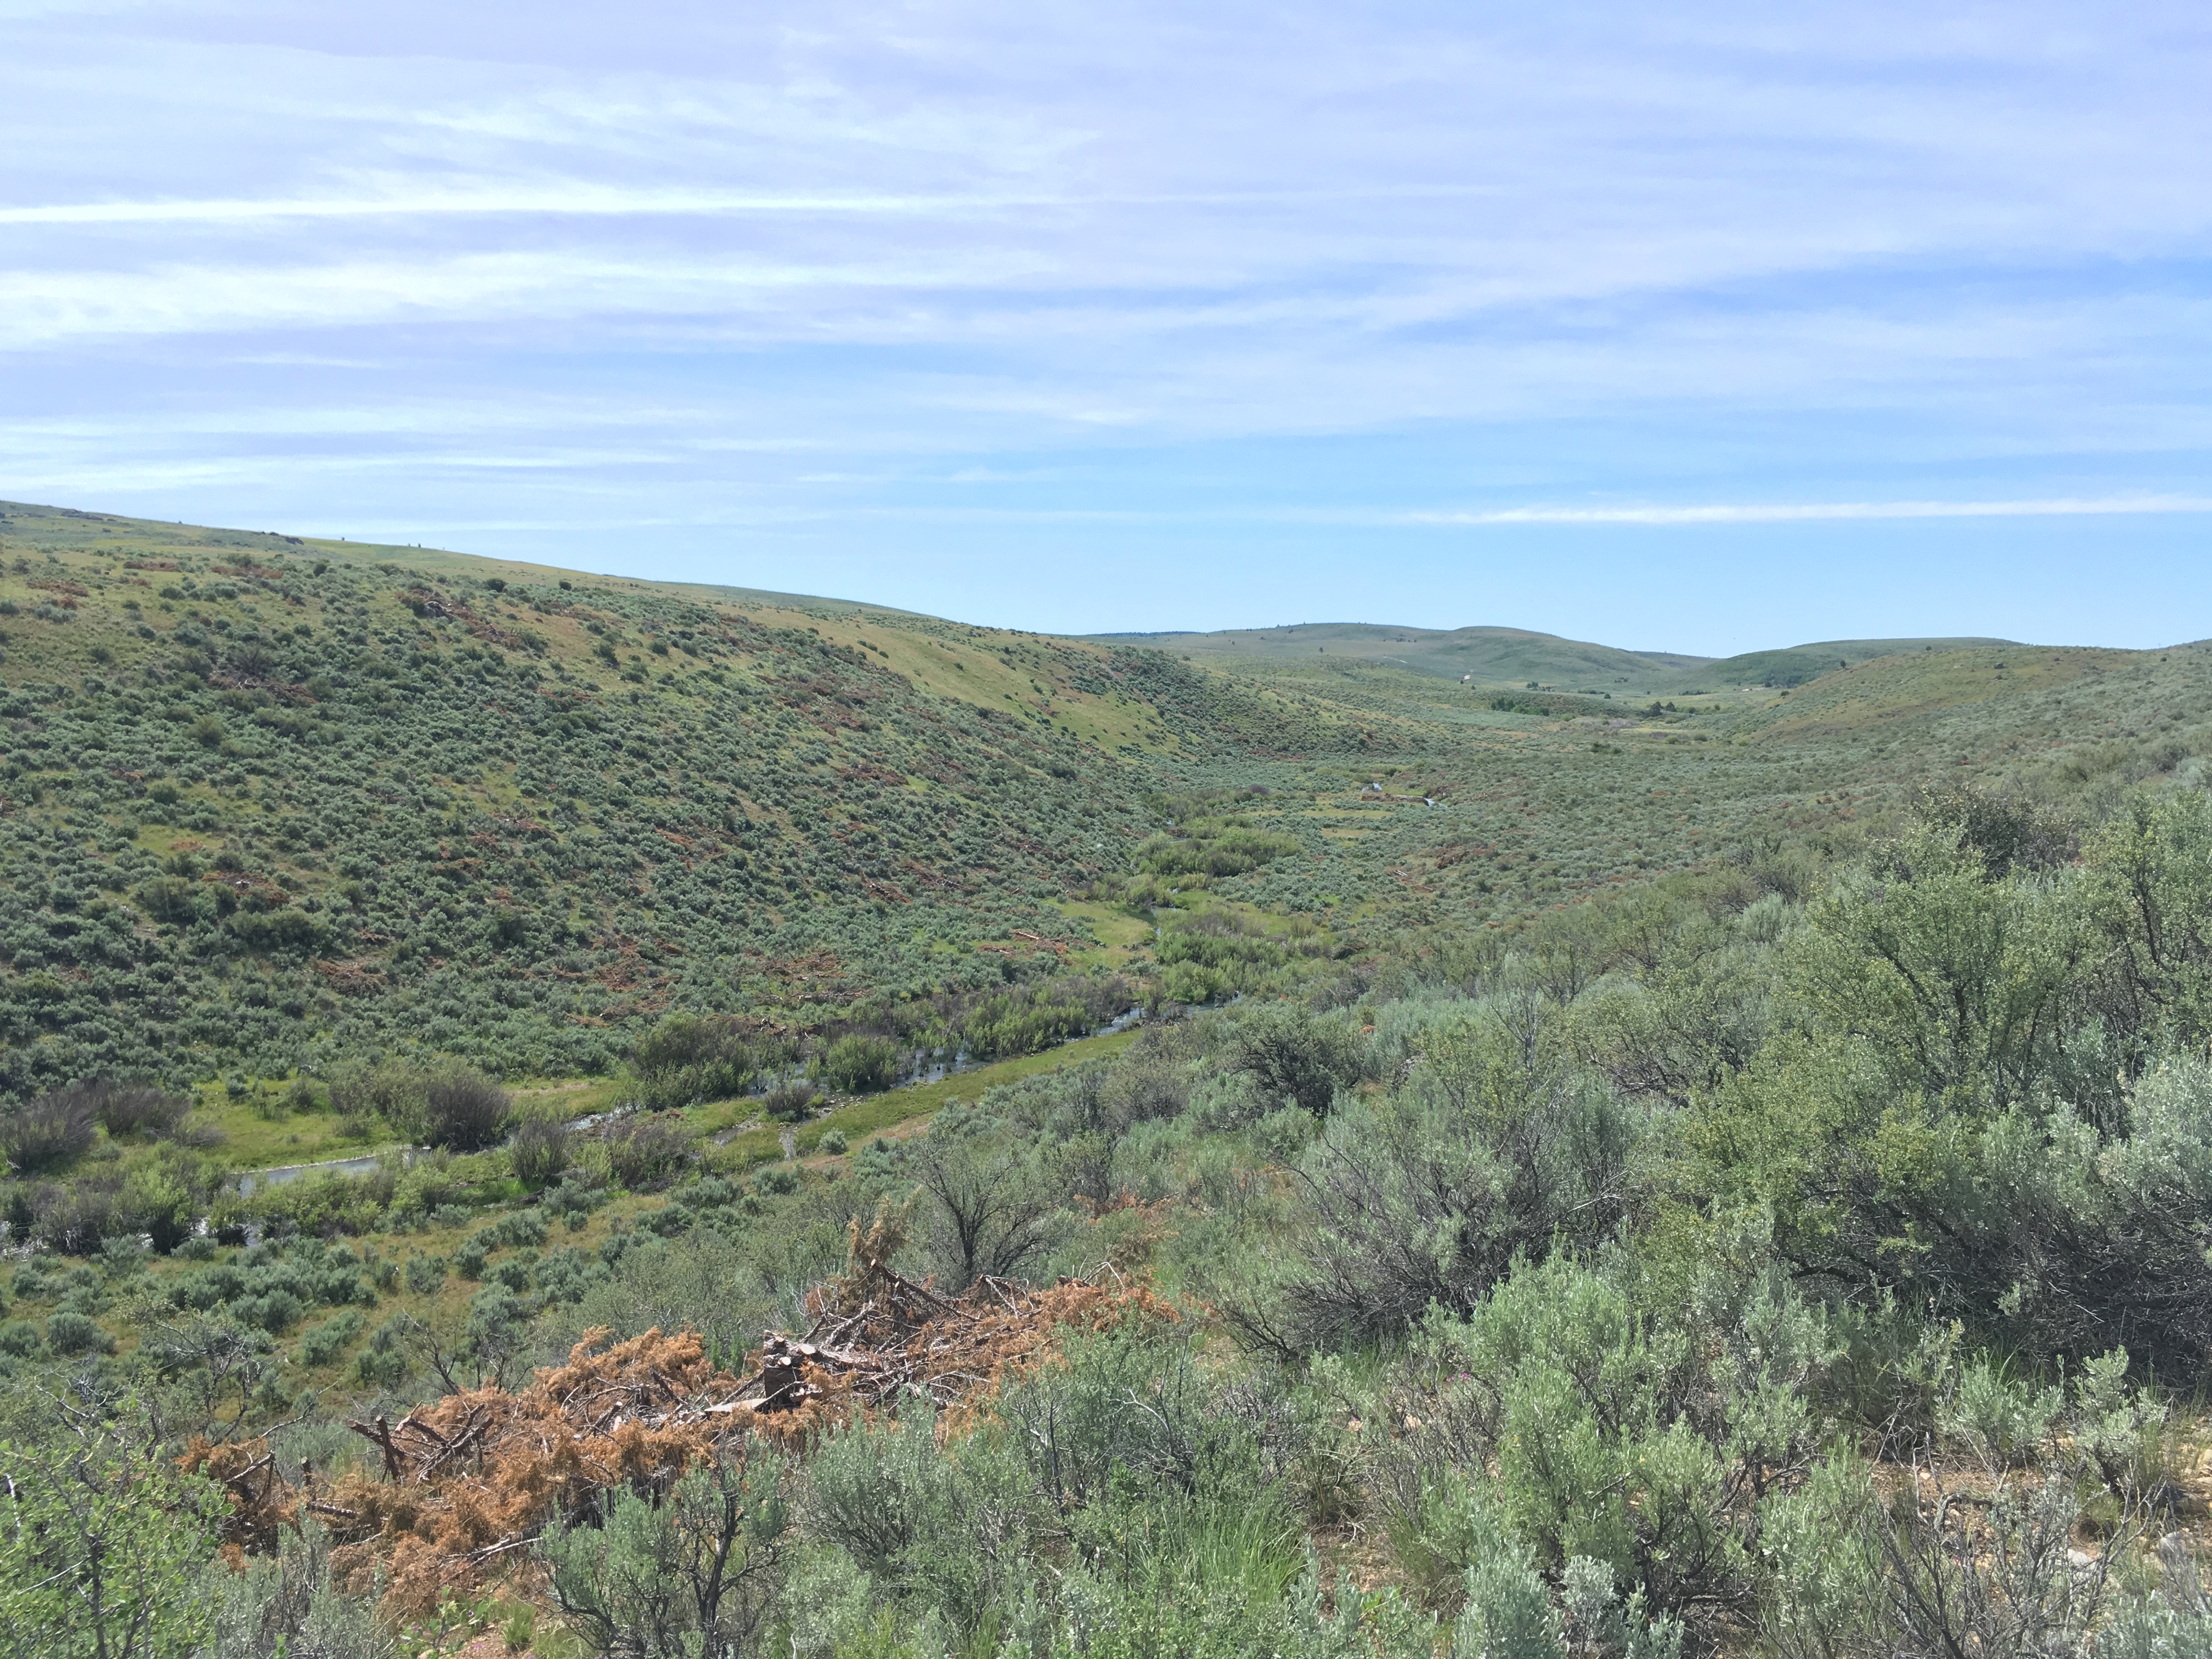 Sagebrush hills with with a small stream in between